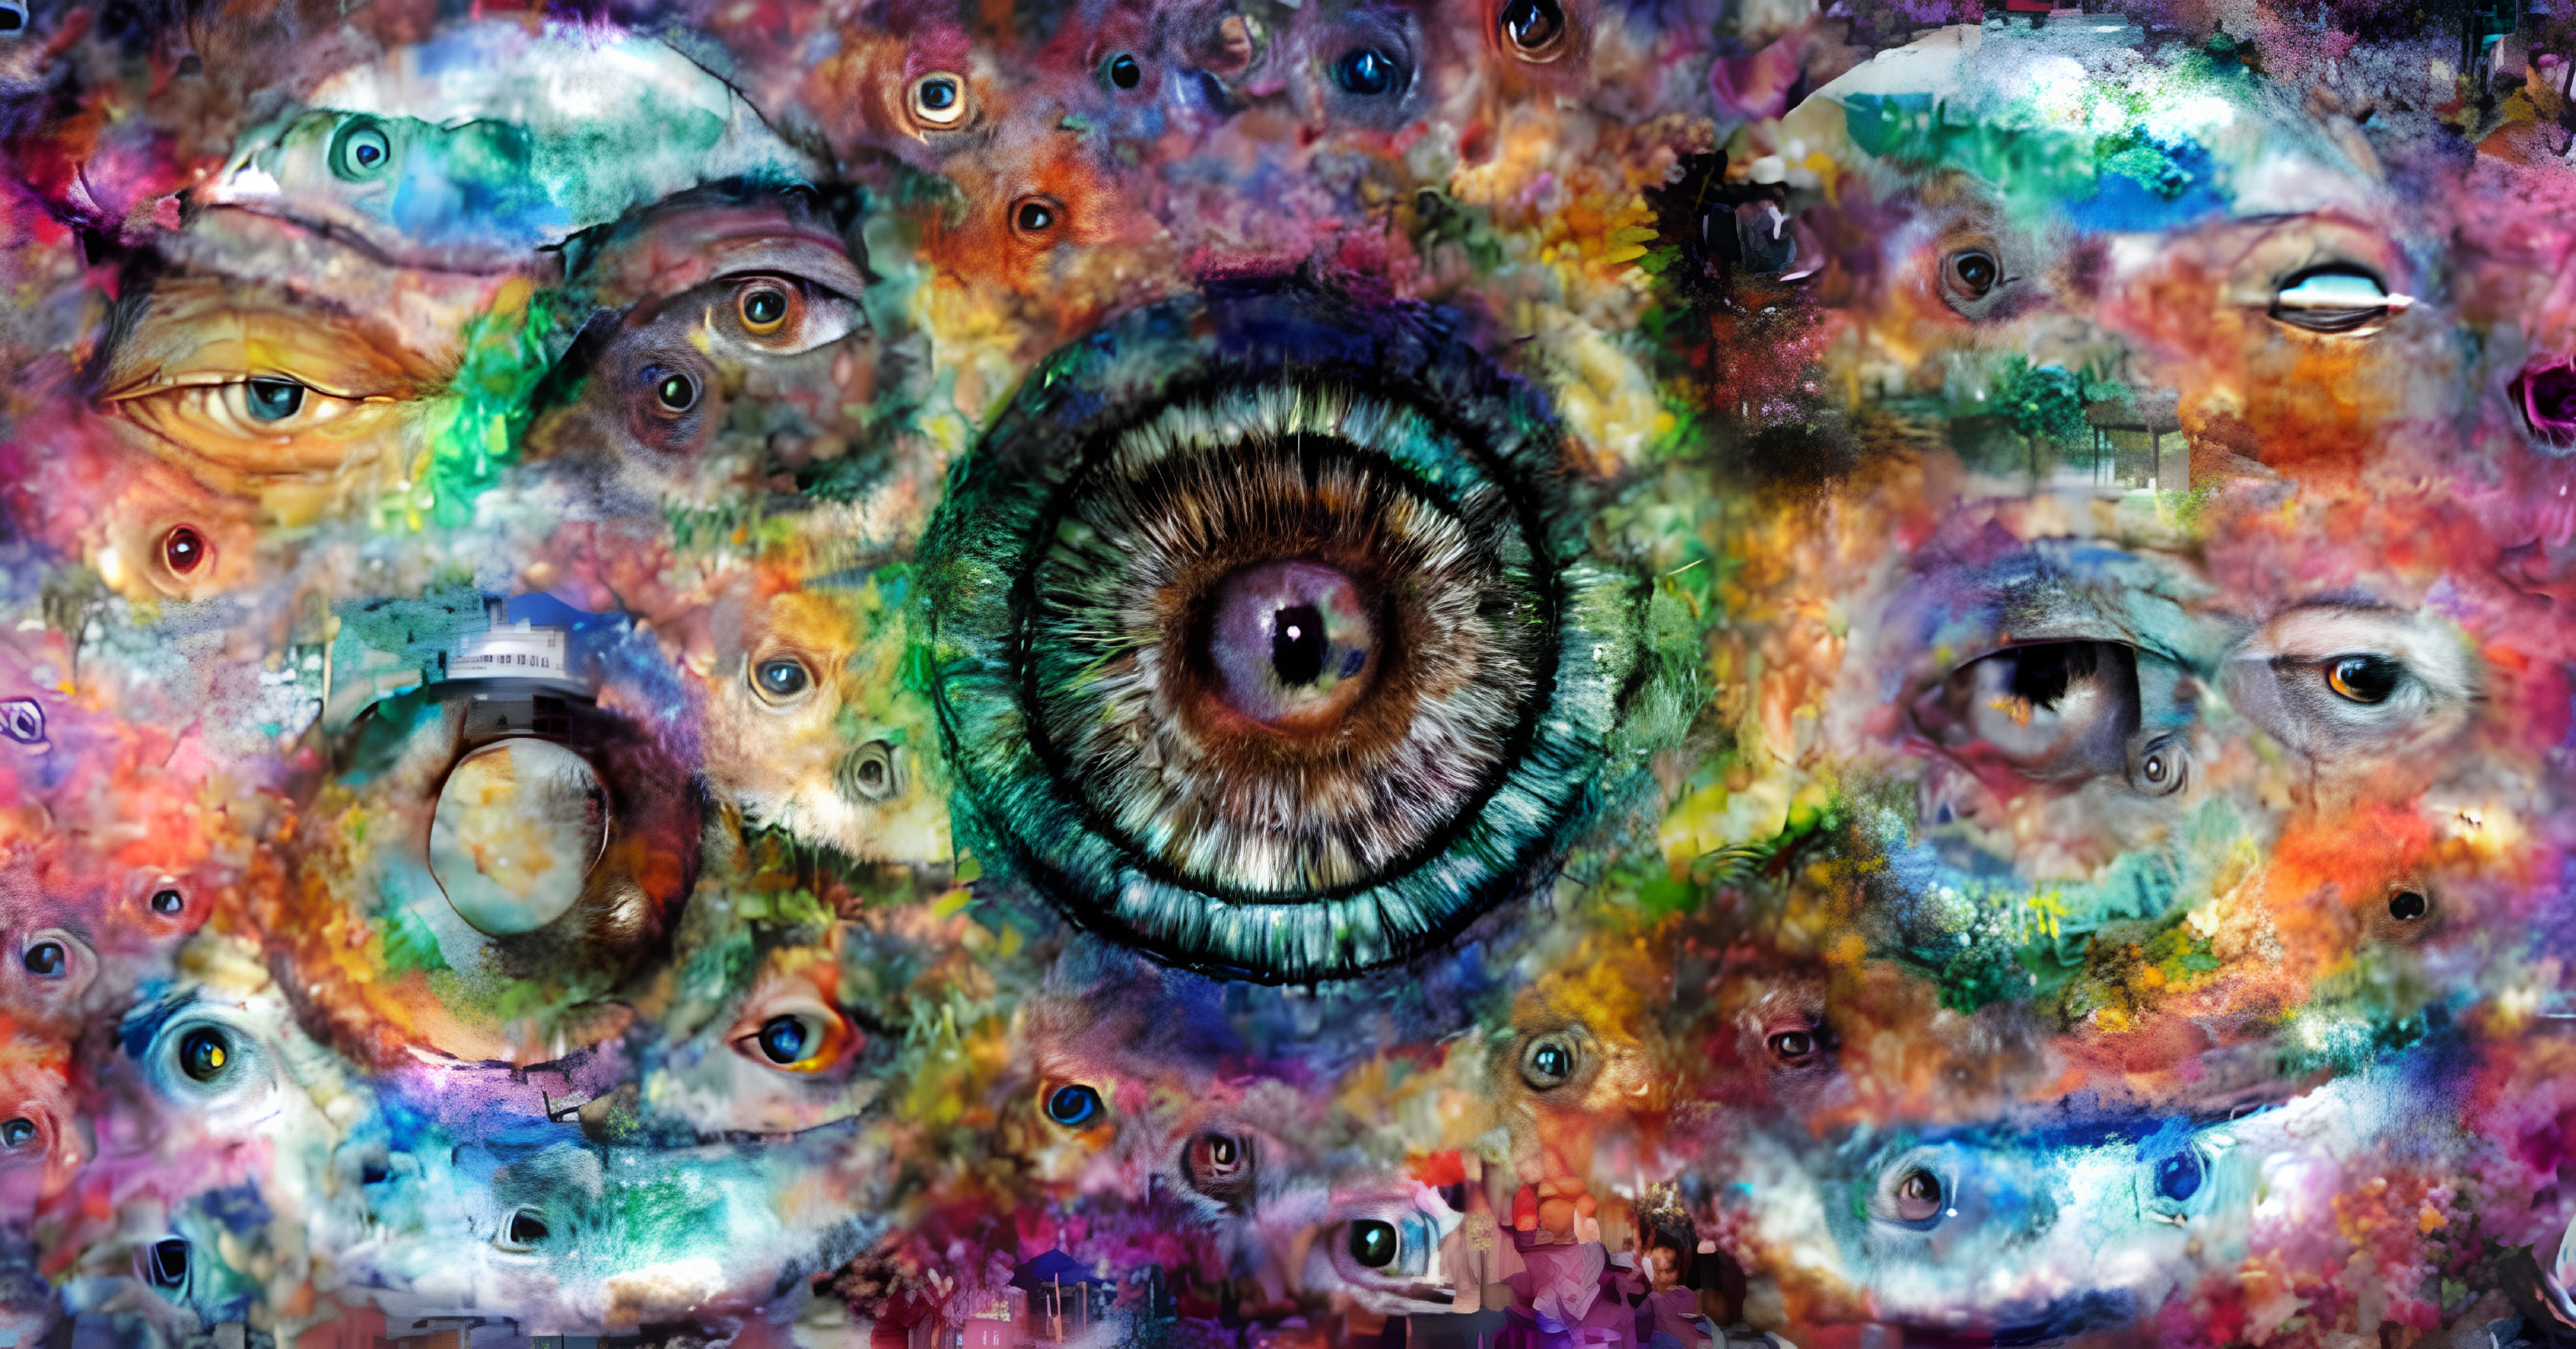 Vibrant surreal artwork: central realistic eye surrounded by various eyes in cosmic setting